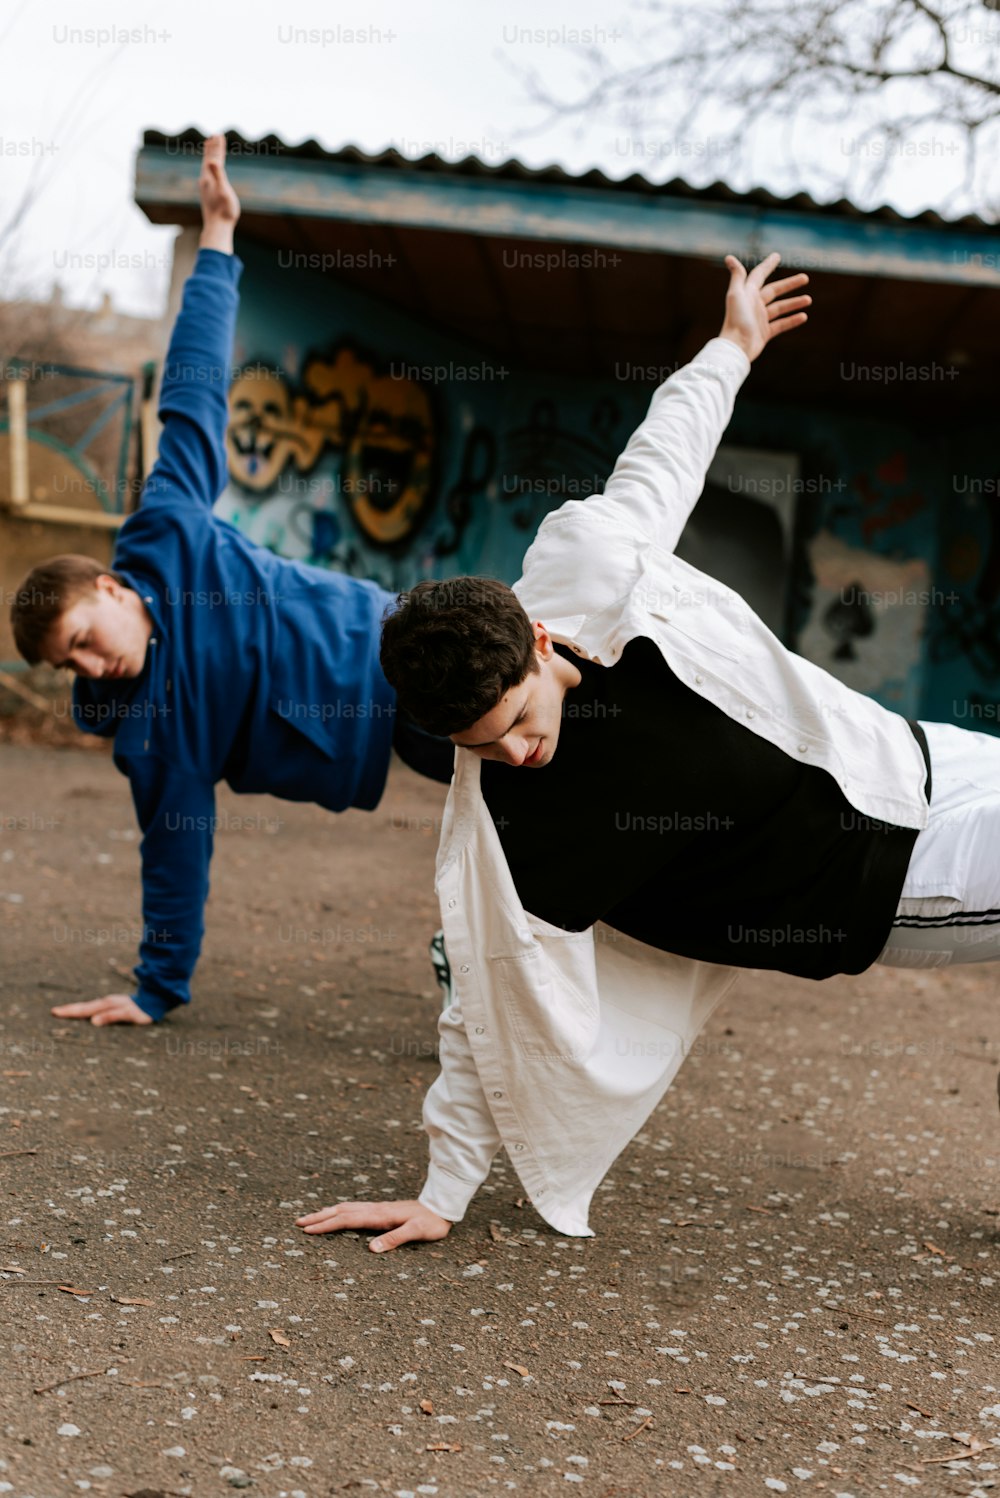 two men doing a handstand on a skateboard